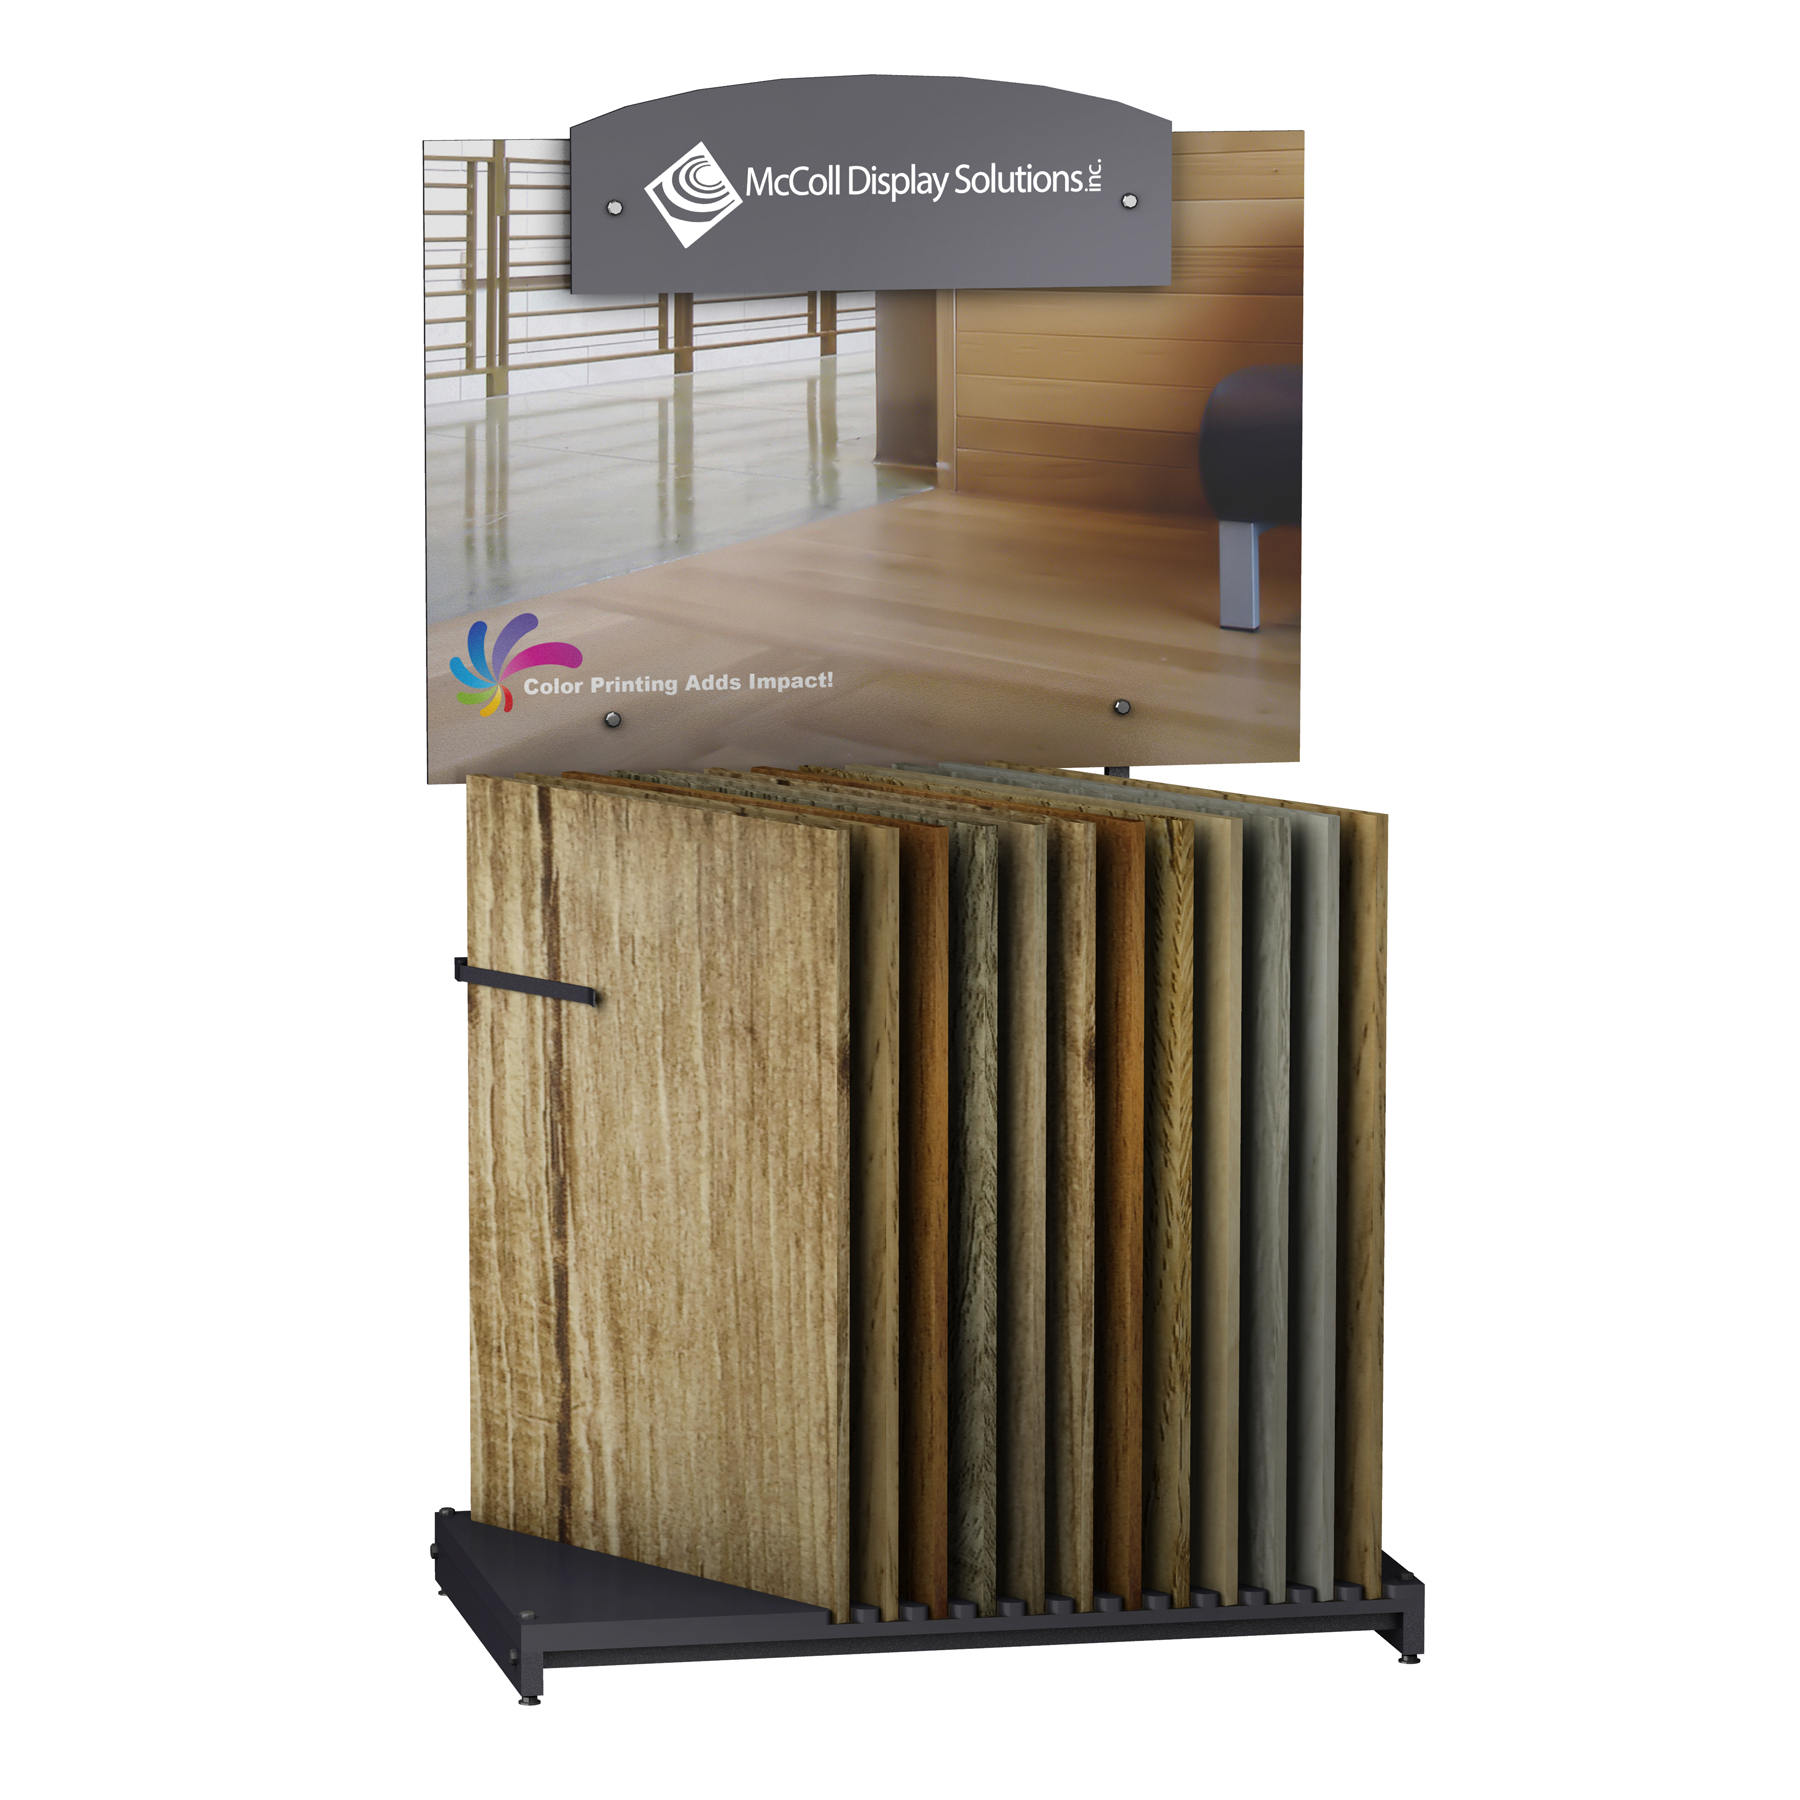 CD101 Display Holds Wood and Laminate Planks with Optional Color Sign